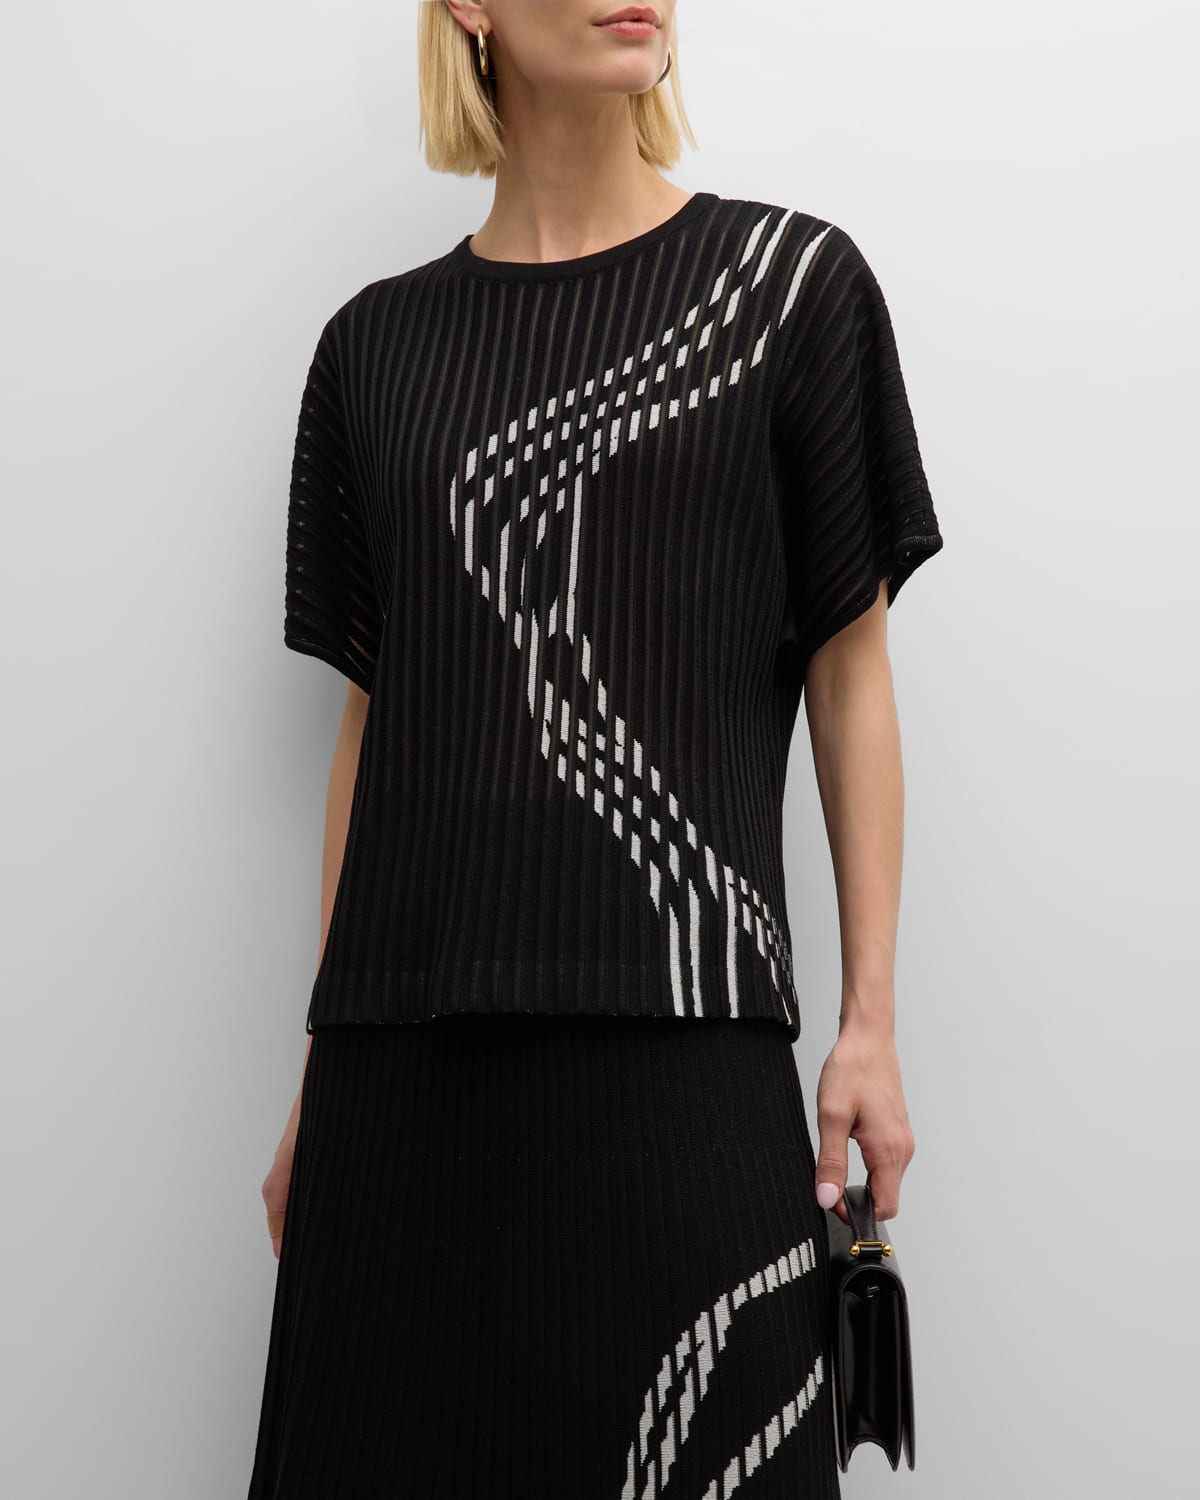 Abstract Stitch Knit Short-Sleeve Tunic